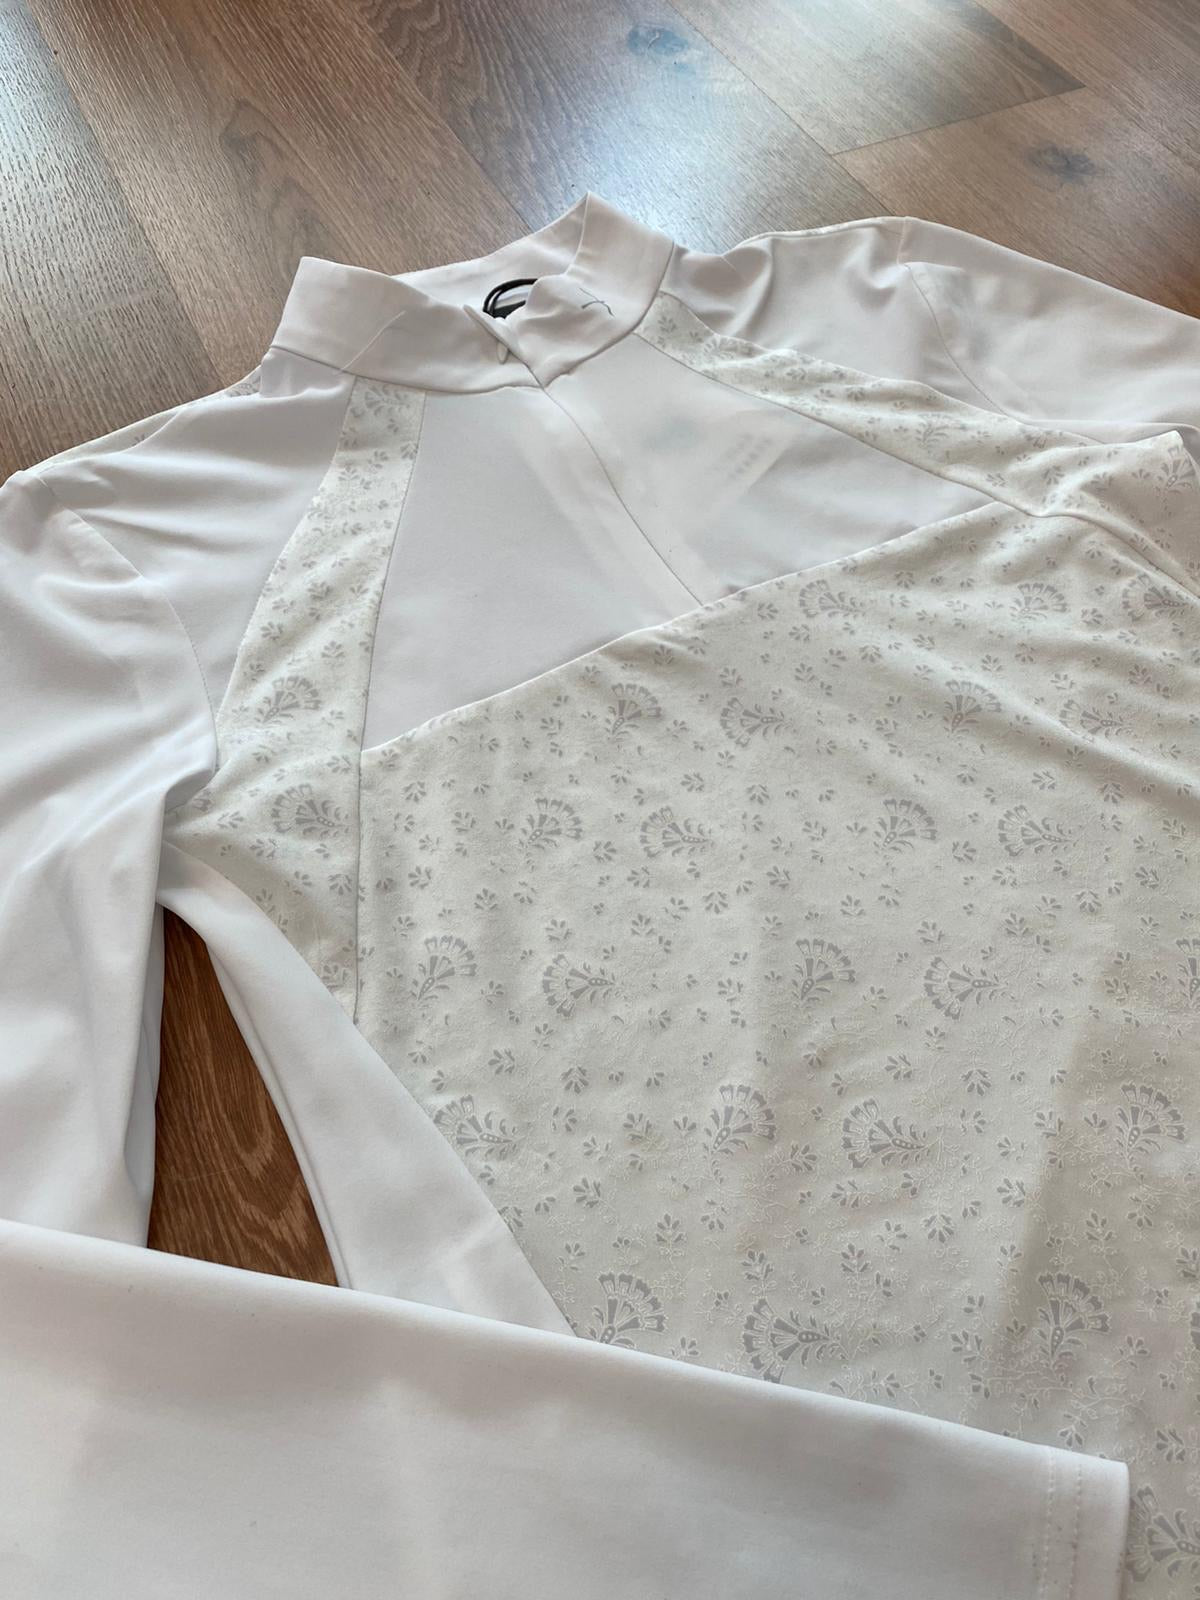 LAGUSO COMPETITION SHIRT BEVERLY